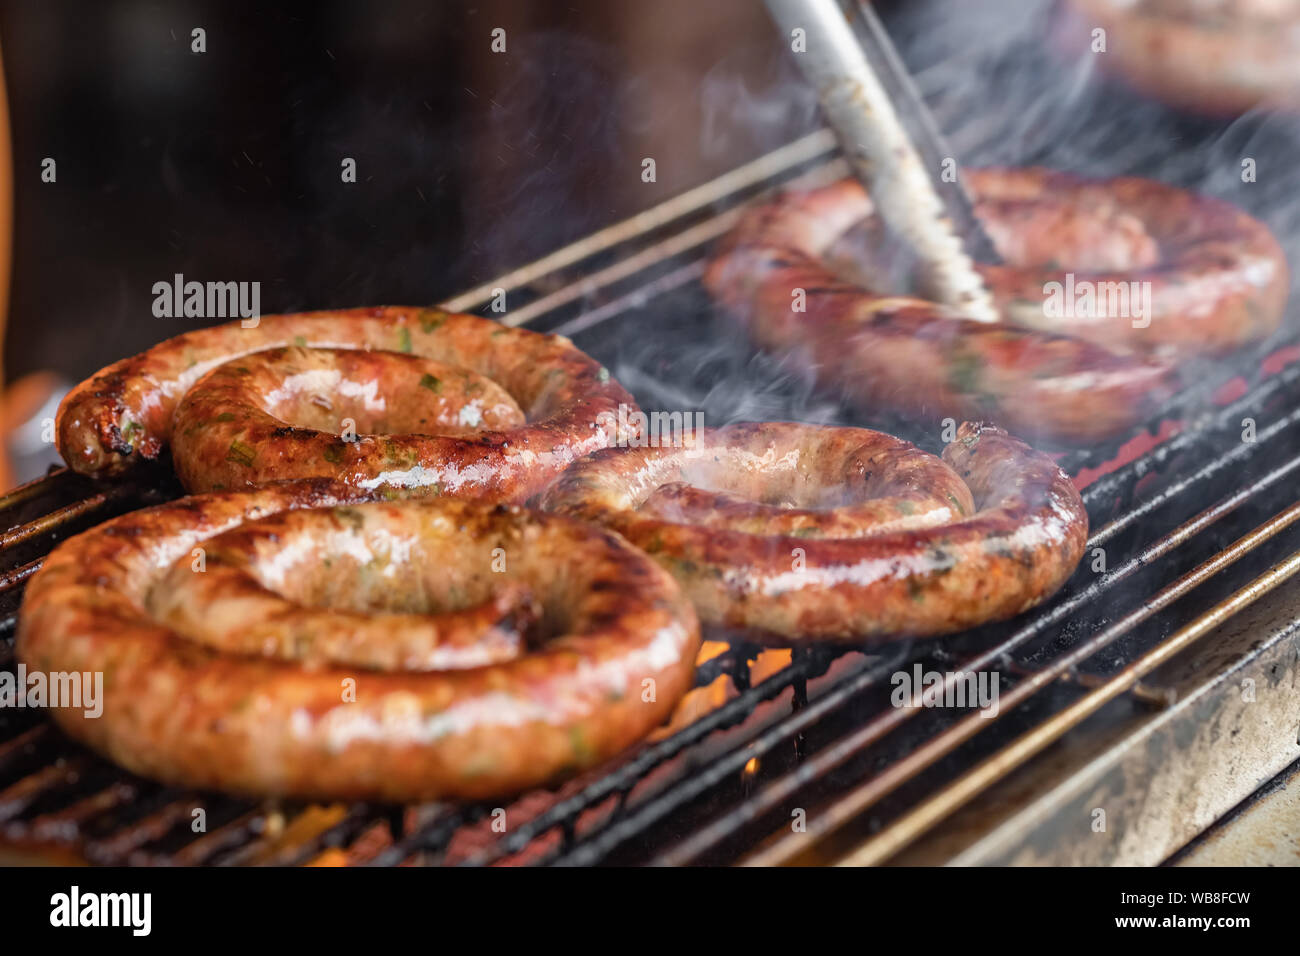 Grilled Northern Thai spicy sausages close-up Stock Photo